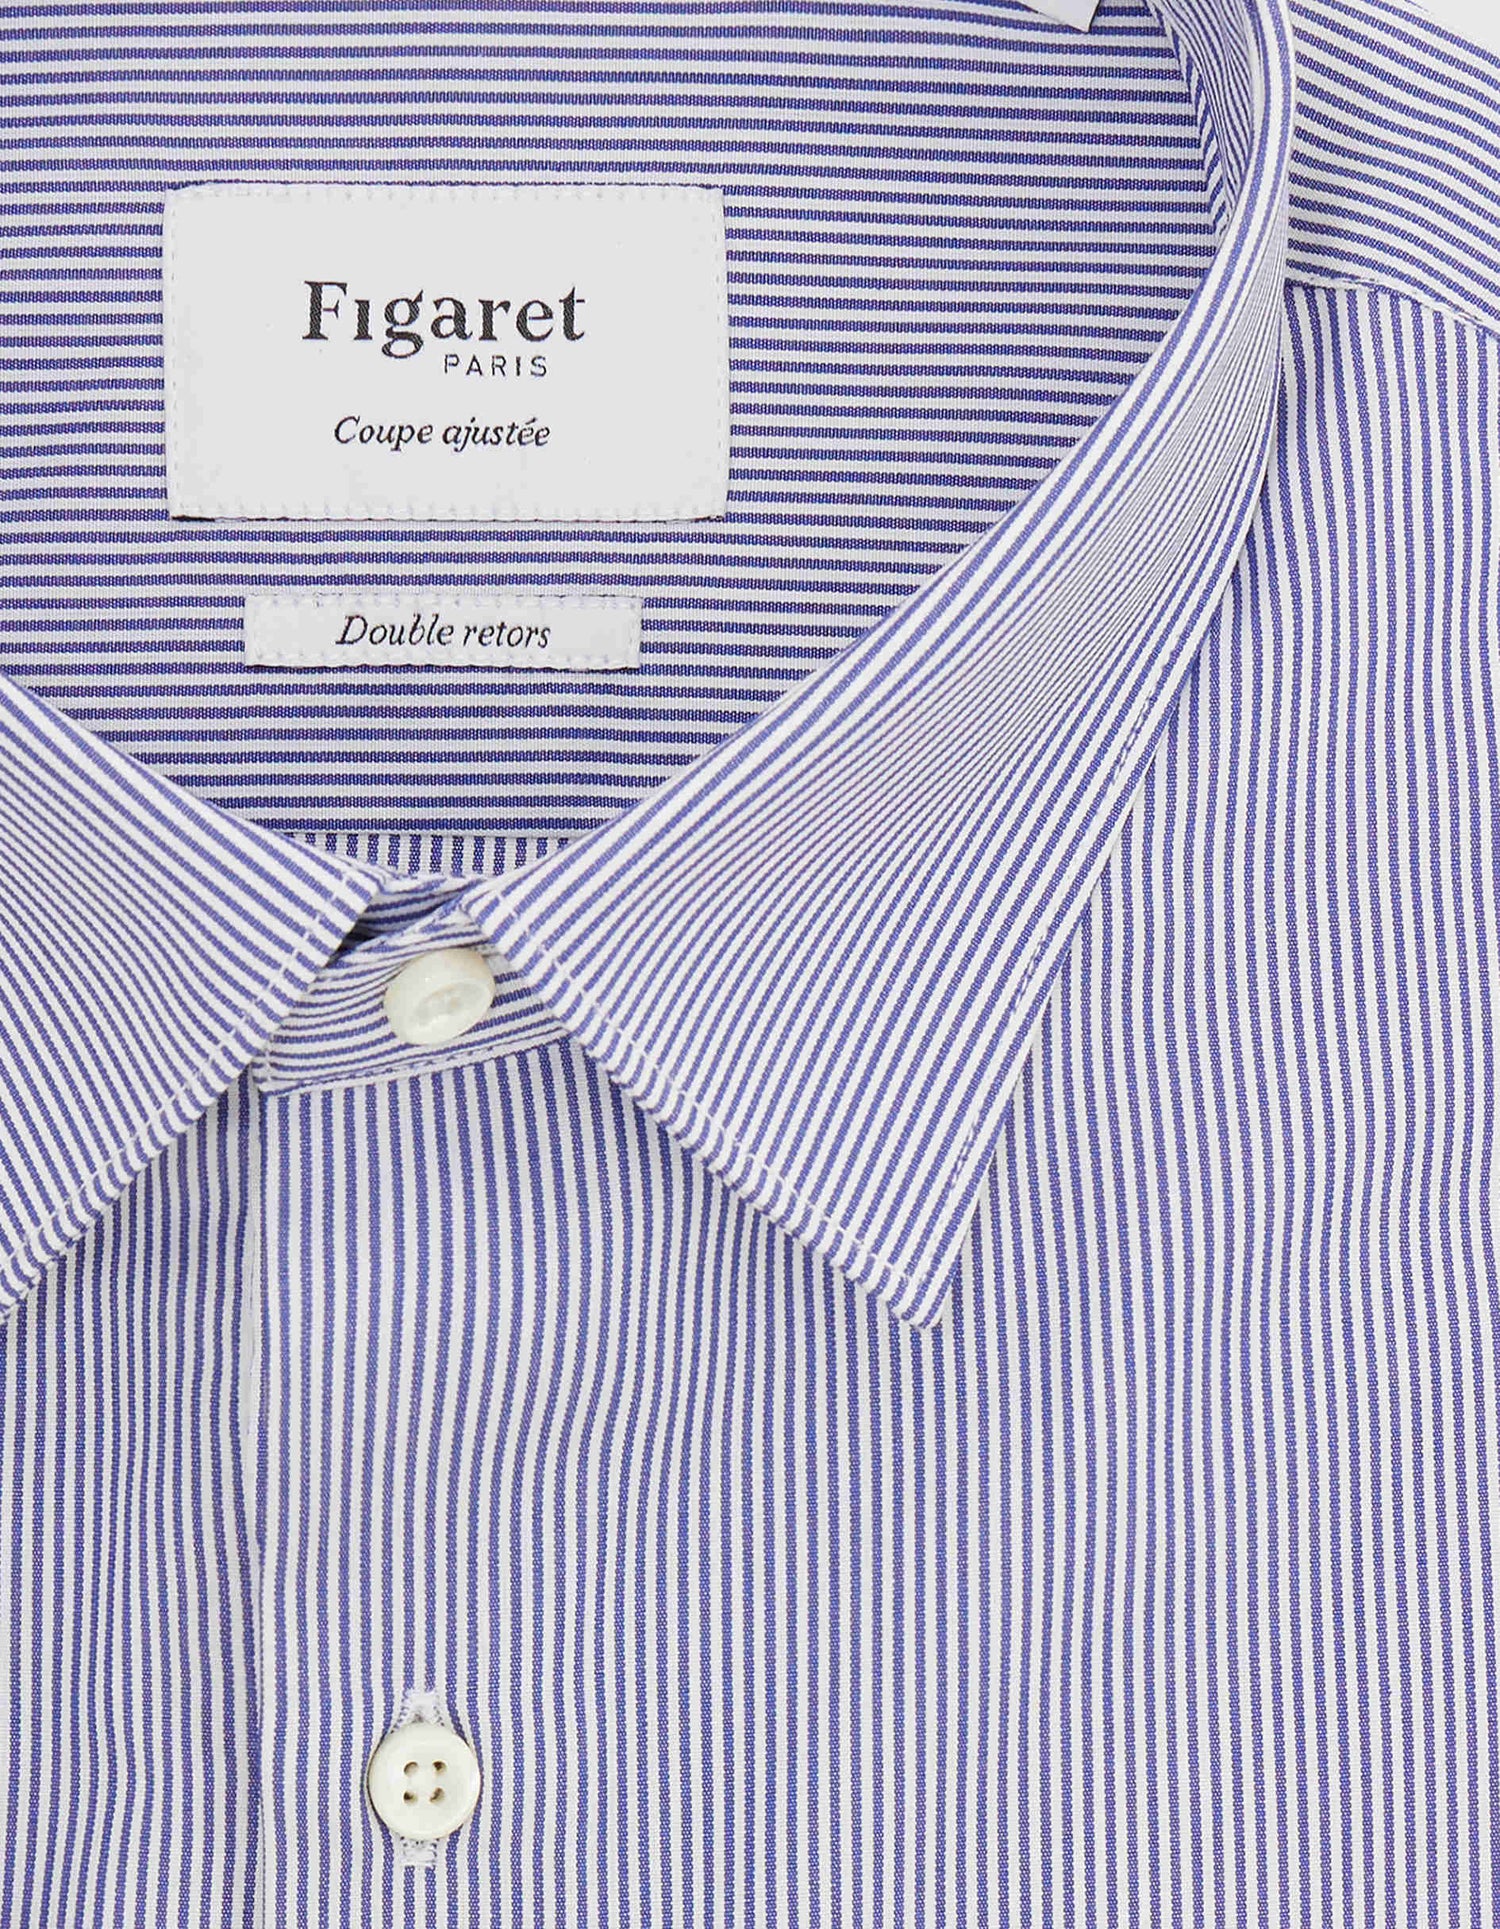 Blue striped fitted shirt - Poplin - Figaret Collar - Musketeers Cuffs#2